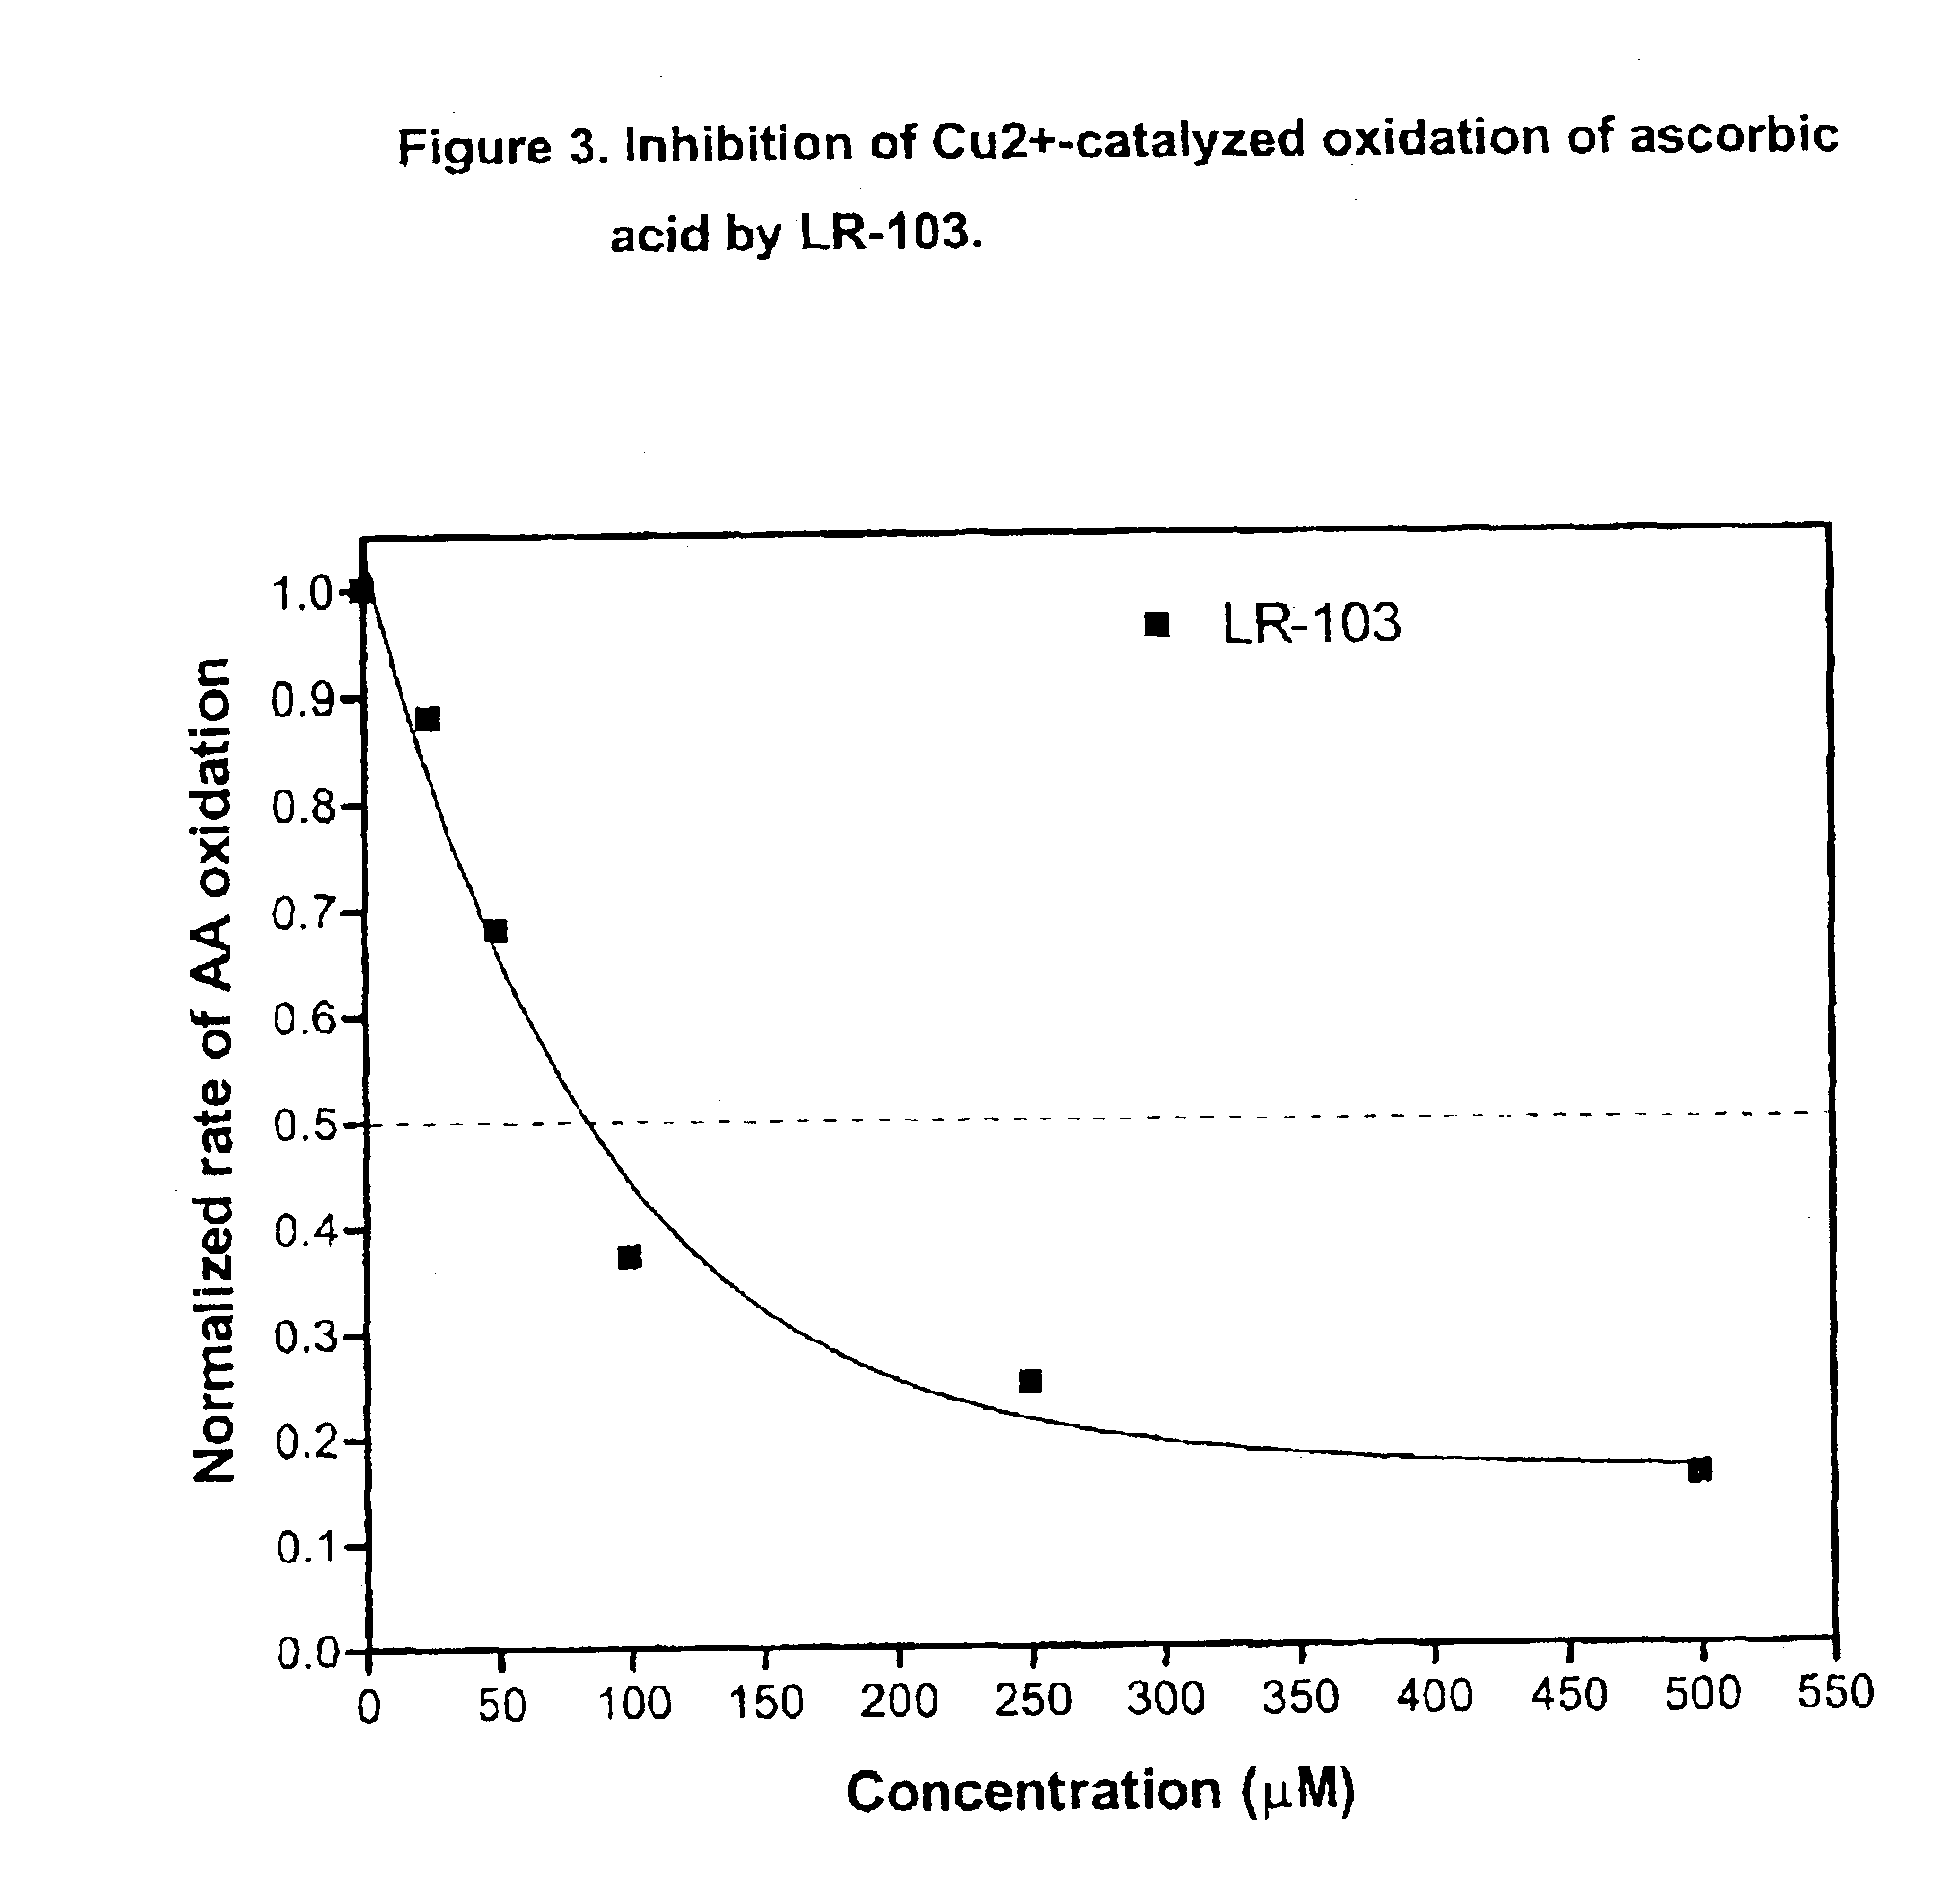 Inhibitors of formation of advanced glycation endproducts (AGEs)